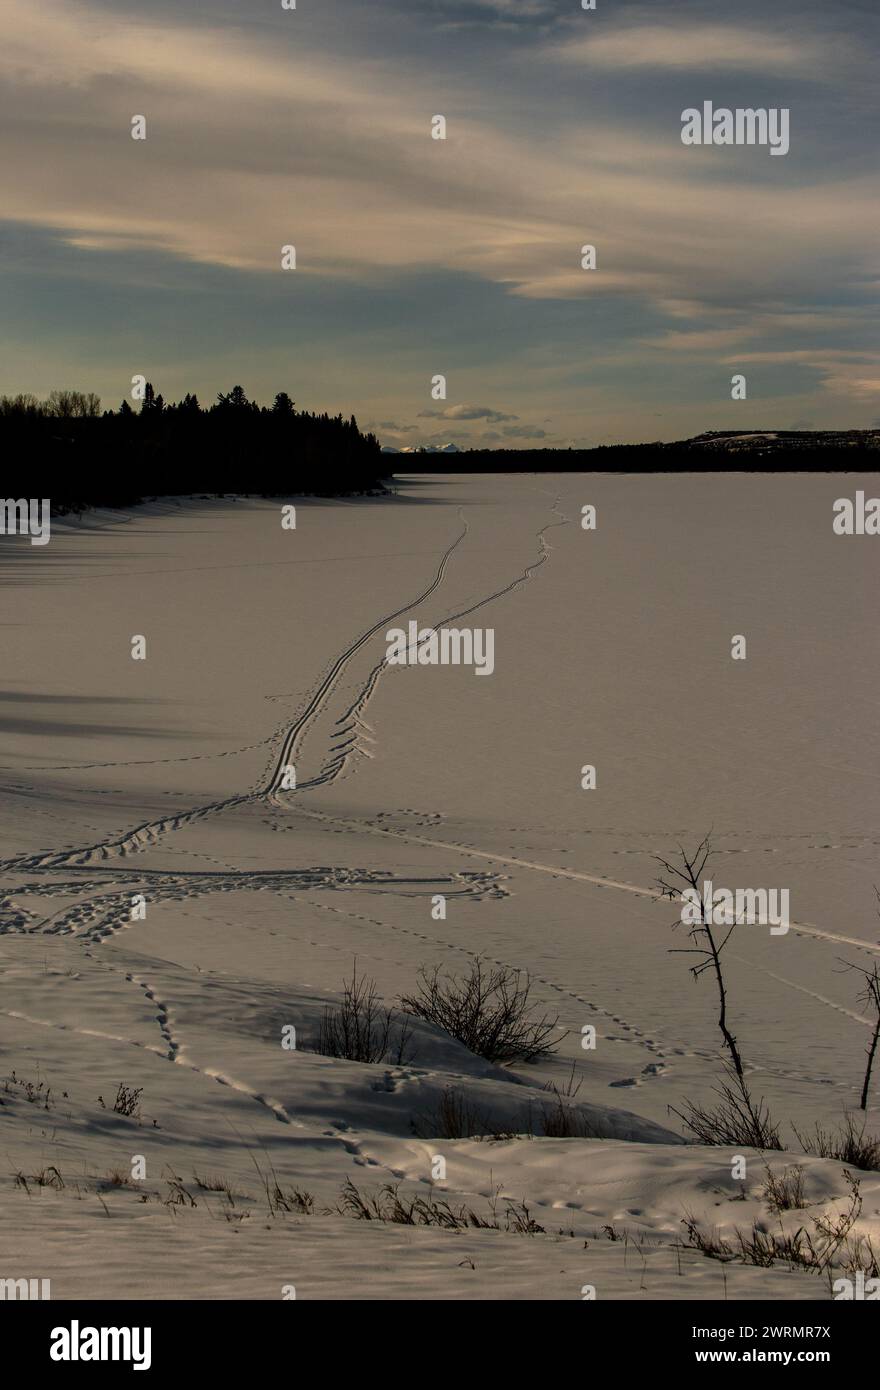 Ski trails on the ice covered water. Stock Photo